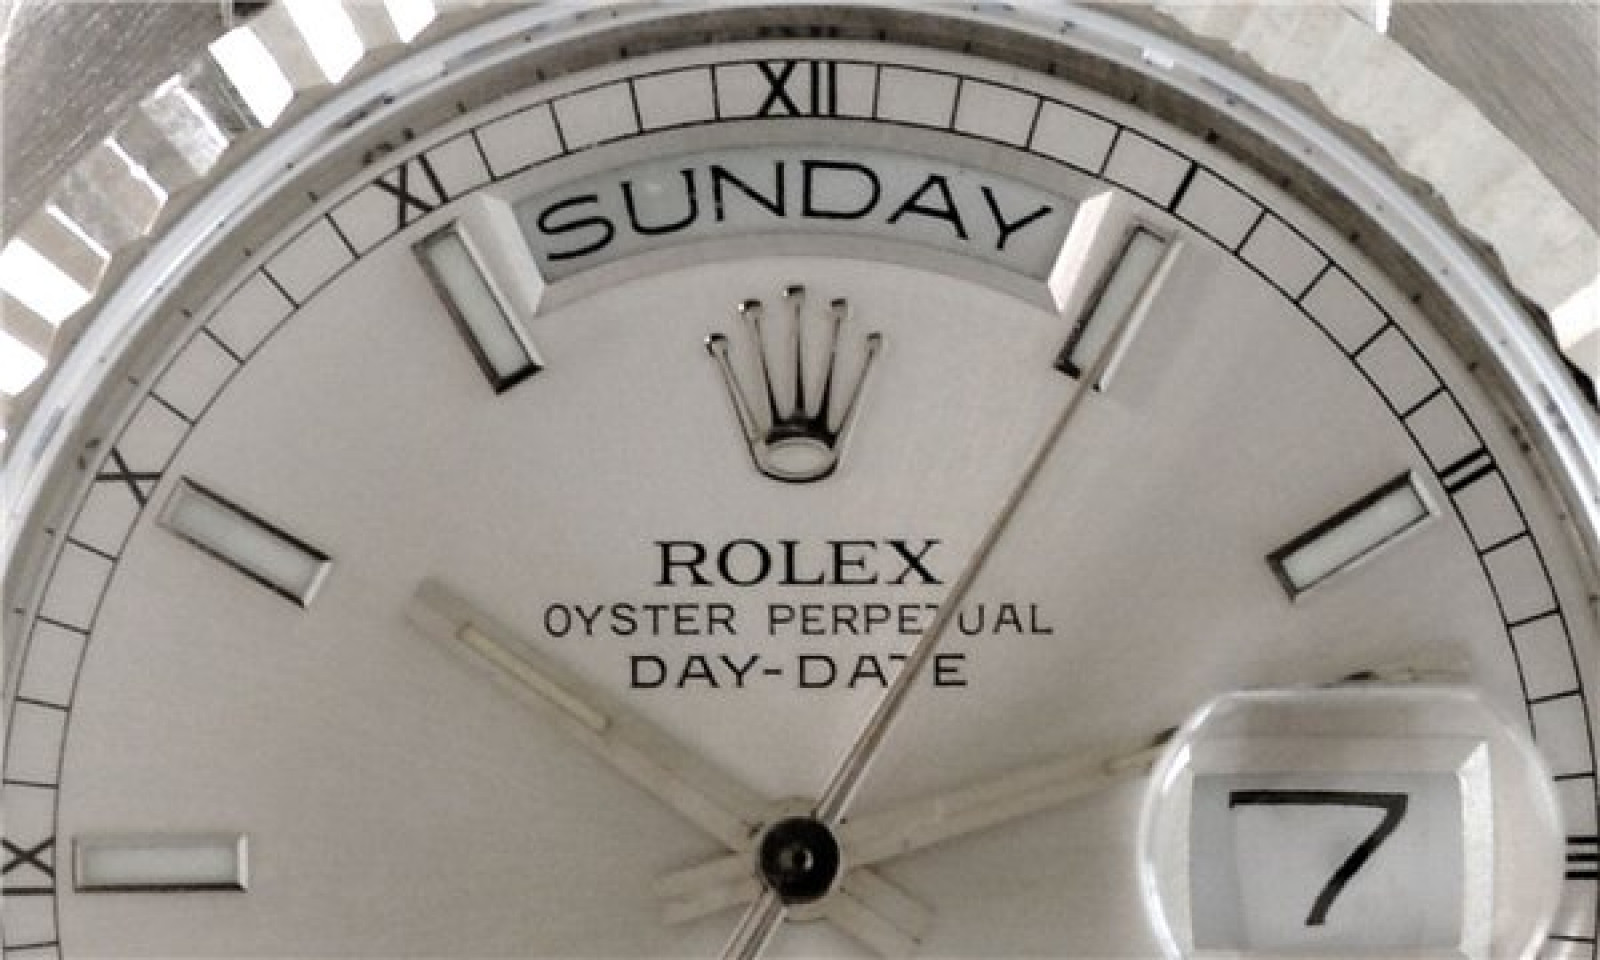 Pre-Owned Rolex Day-Date 18039